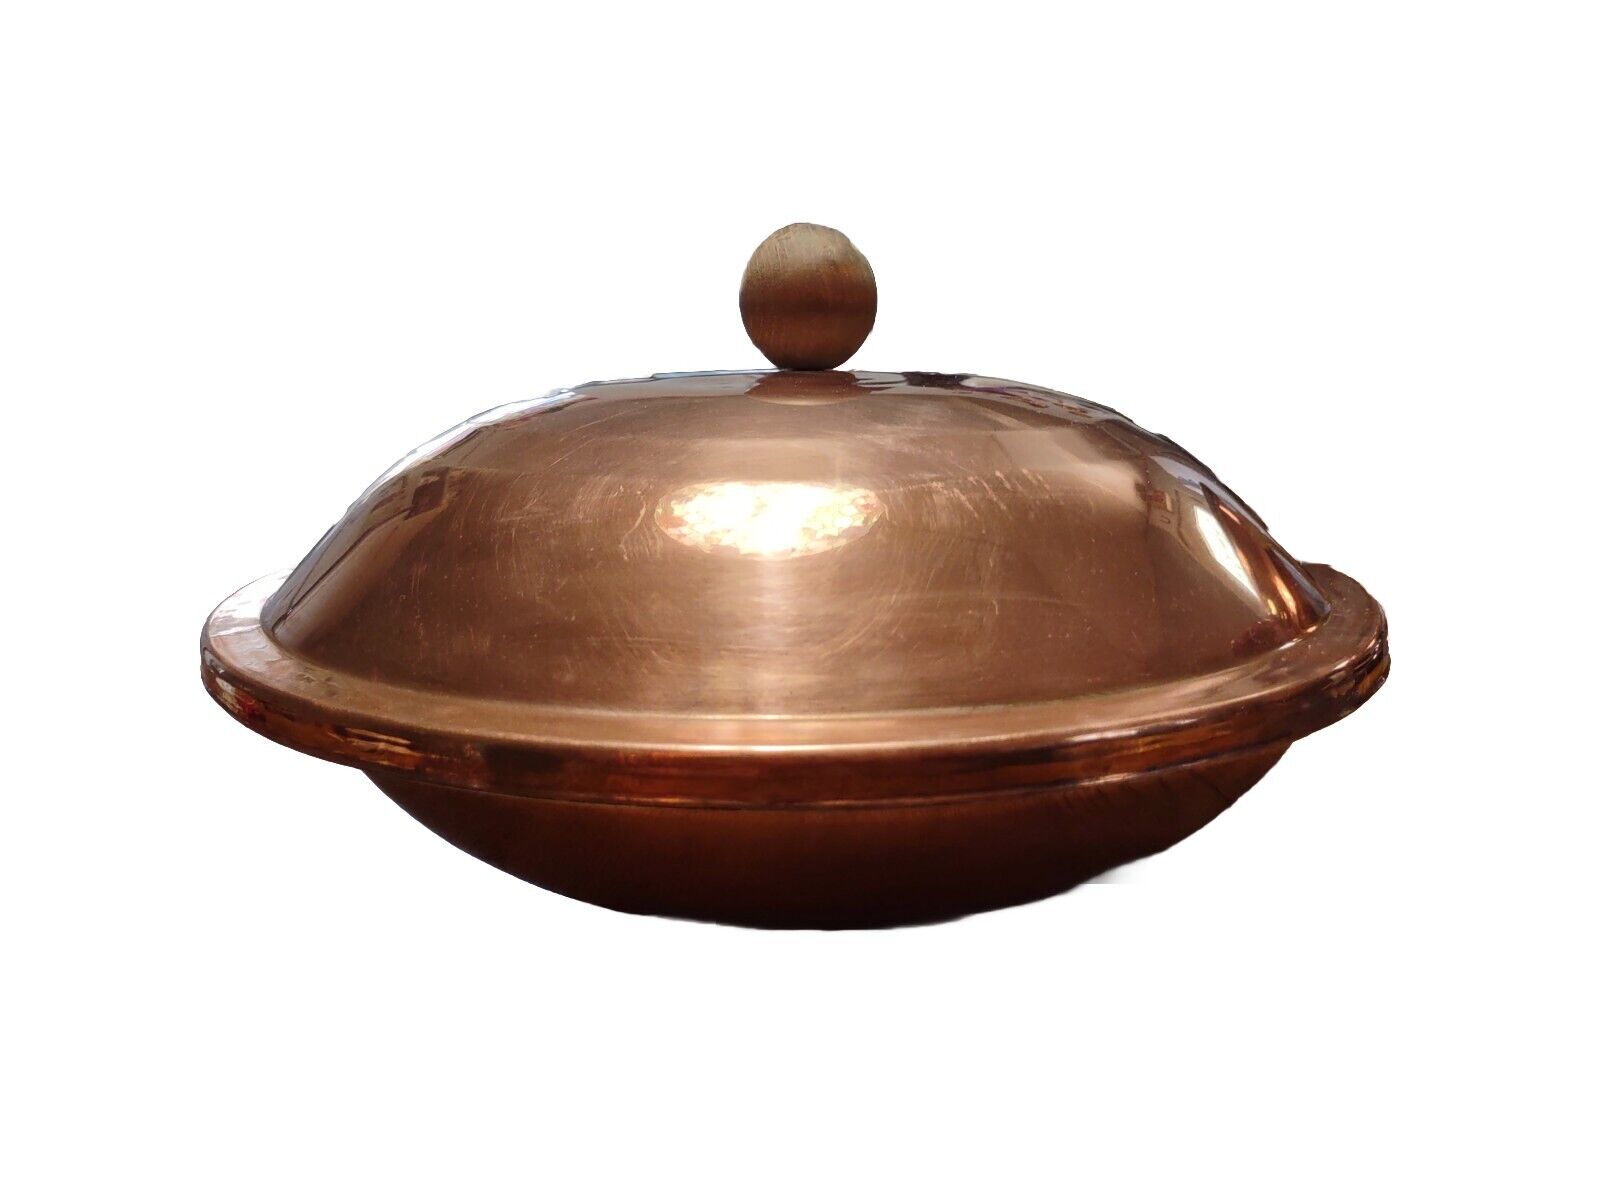 2 Piece Extra Large Covered Copper Serving Tray w/Wooden Handle